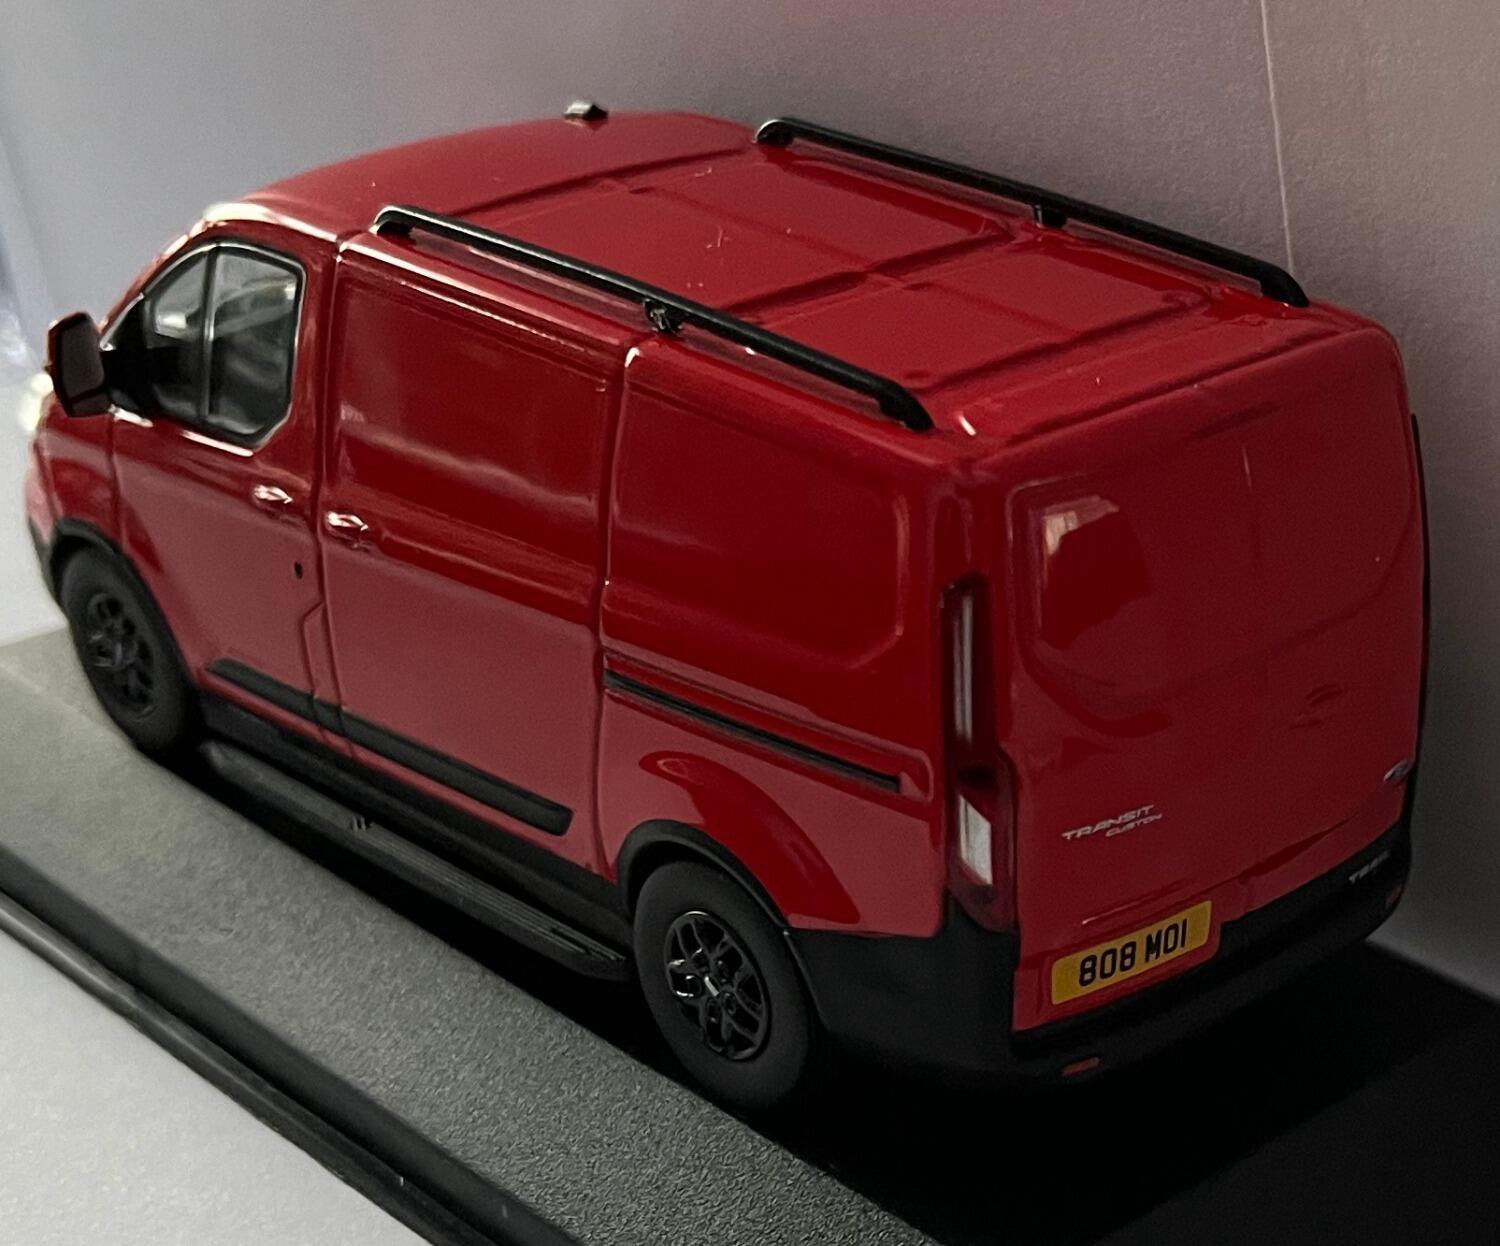 Ford Transit Custom Trail 2.0 (L1 H1) in race red ,1:43 scale diecast van model from Corgi, VA15102, limited edition